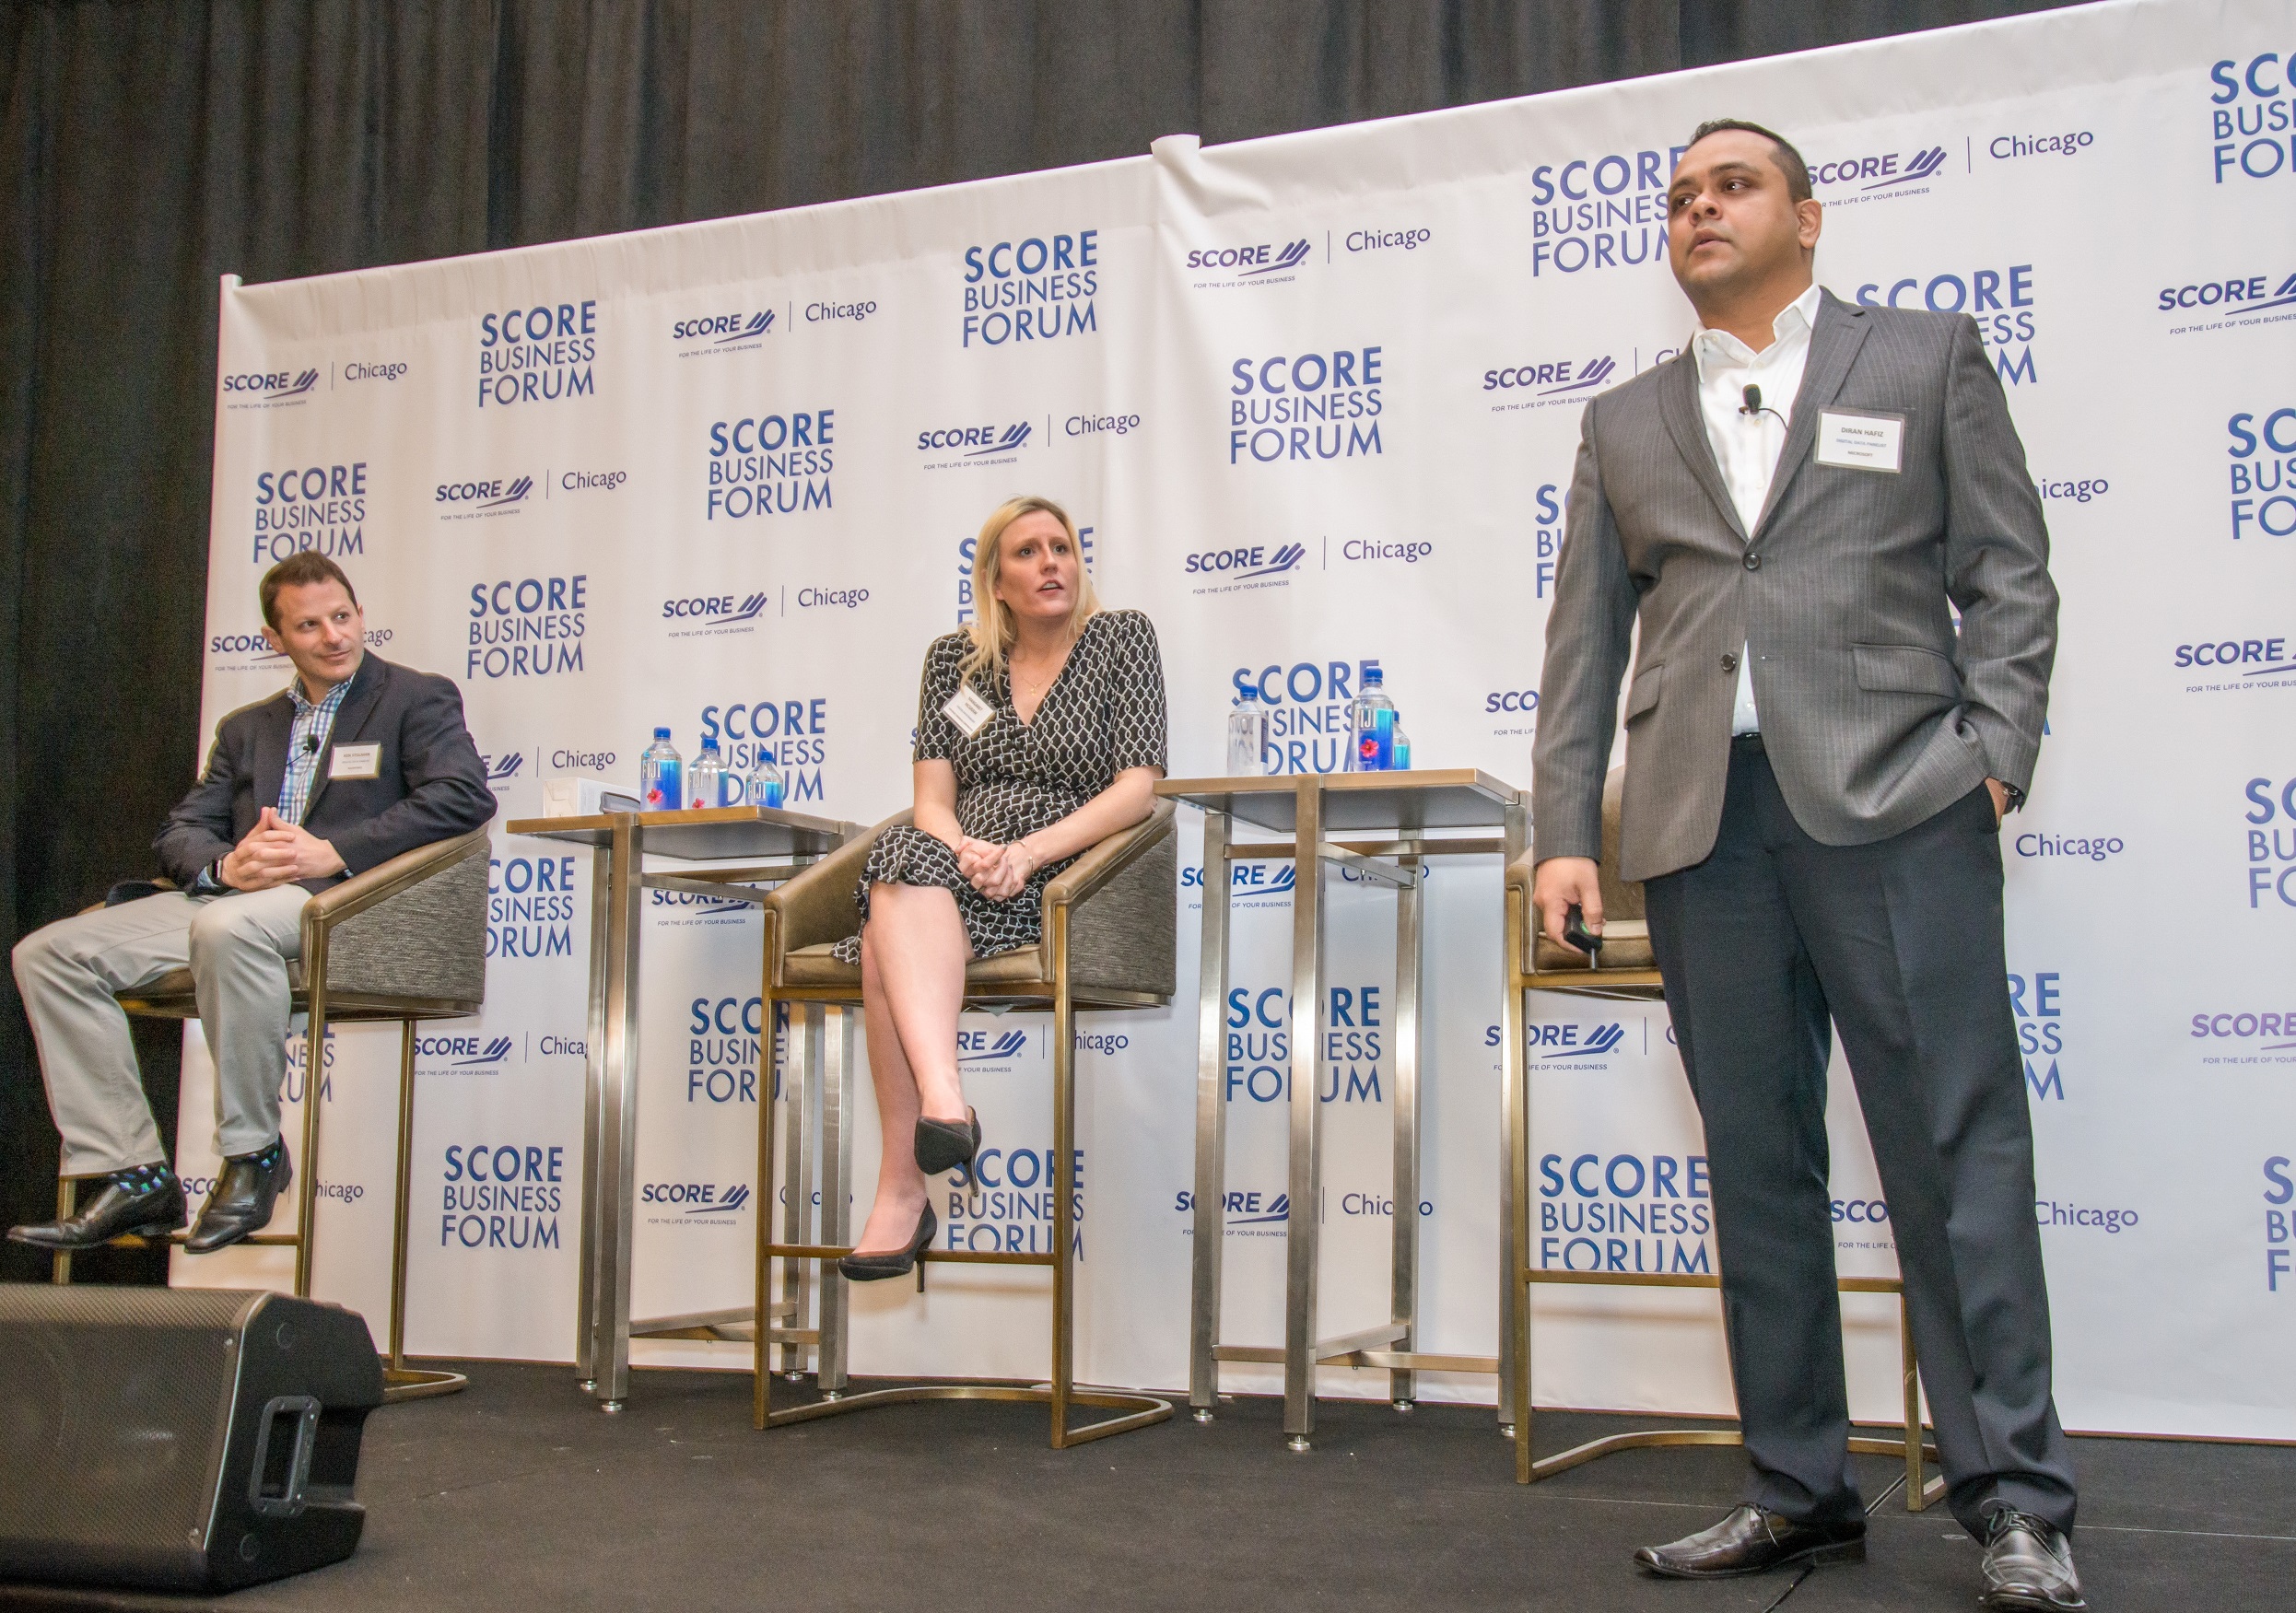 Images from SCORE Business Forum – scroll through the pictures